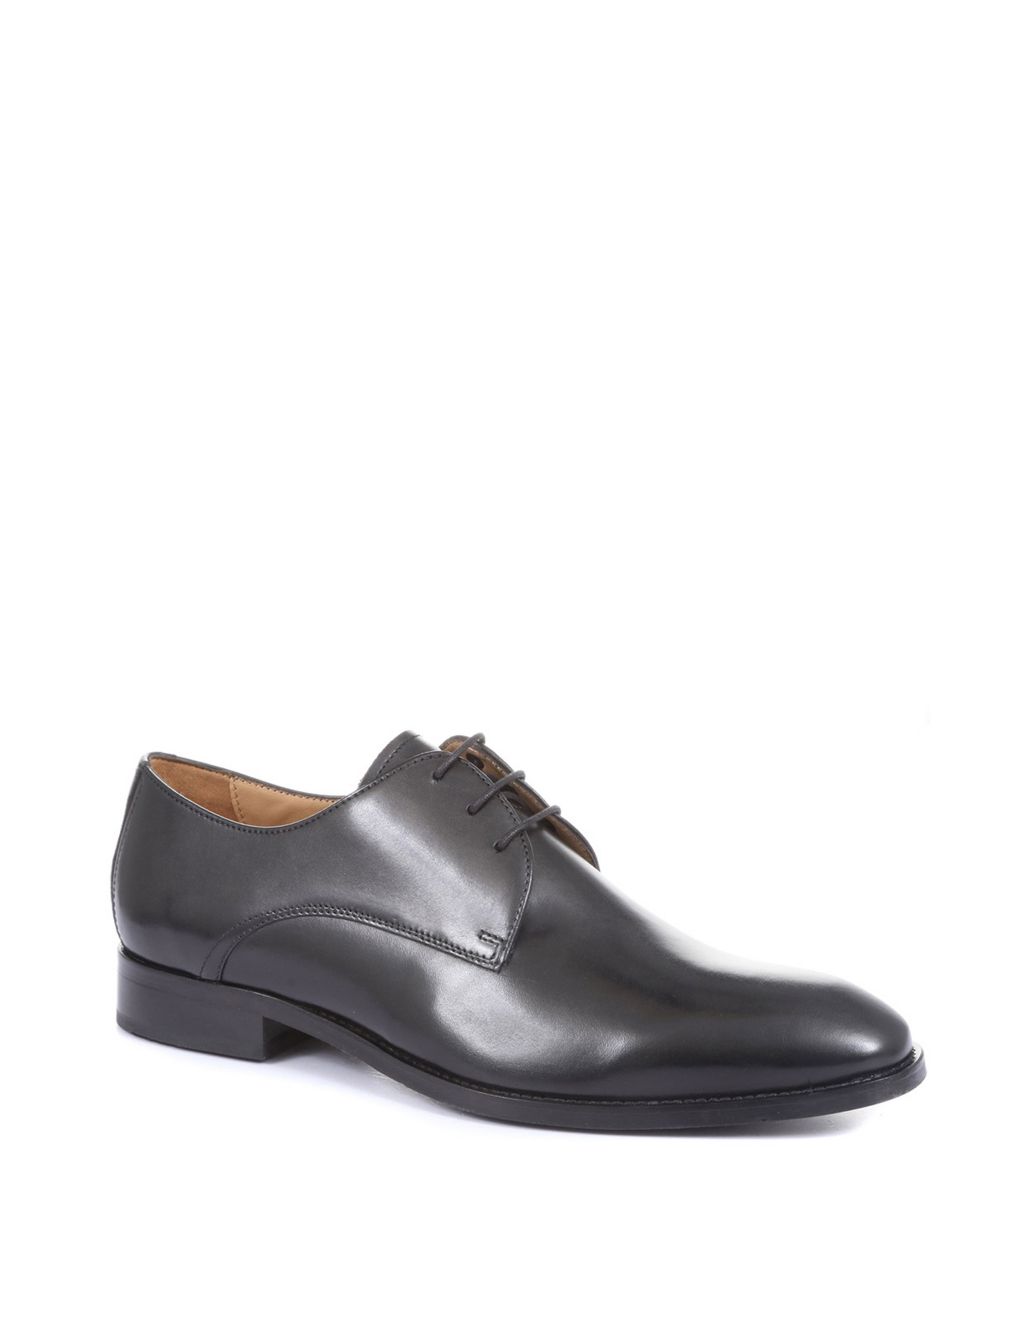 Leather Derby Shoe image 3